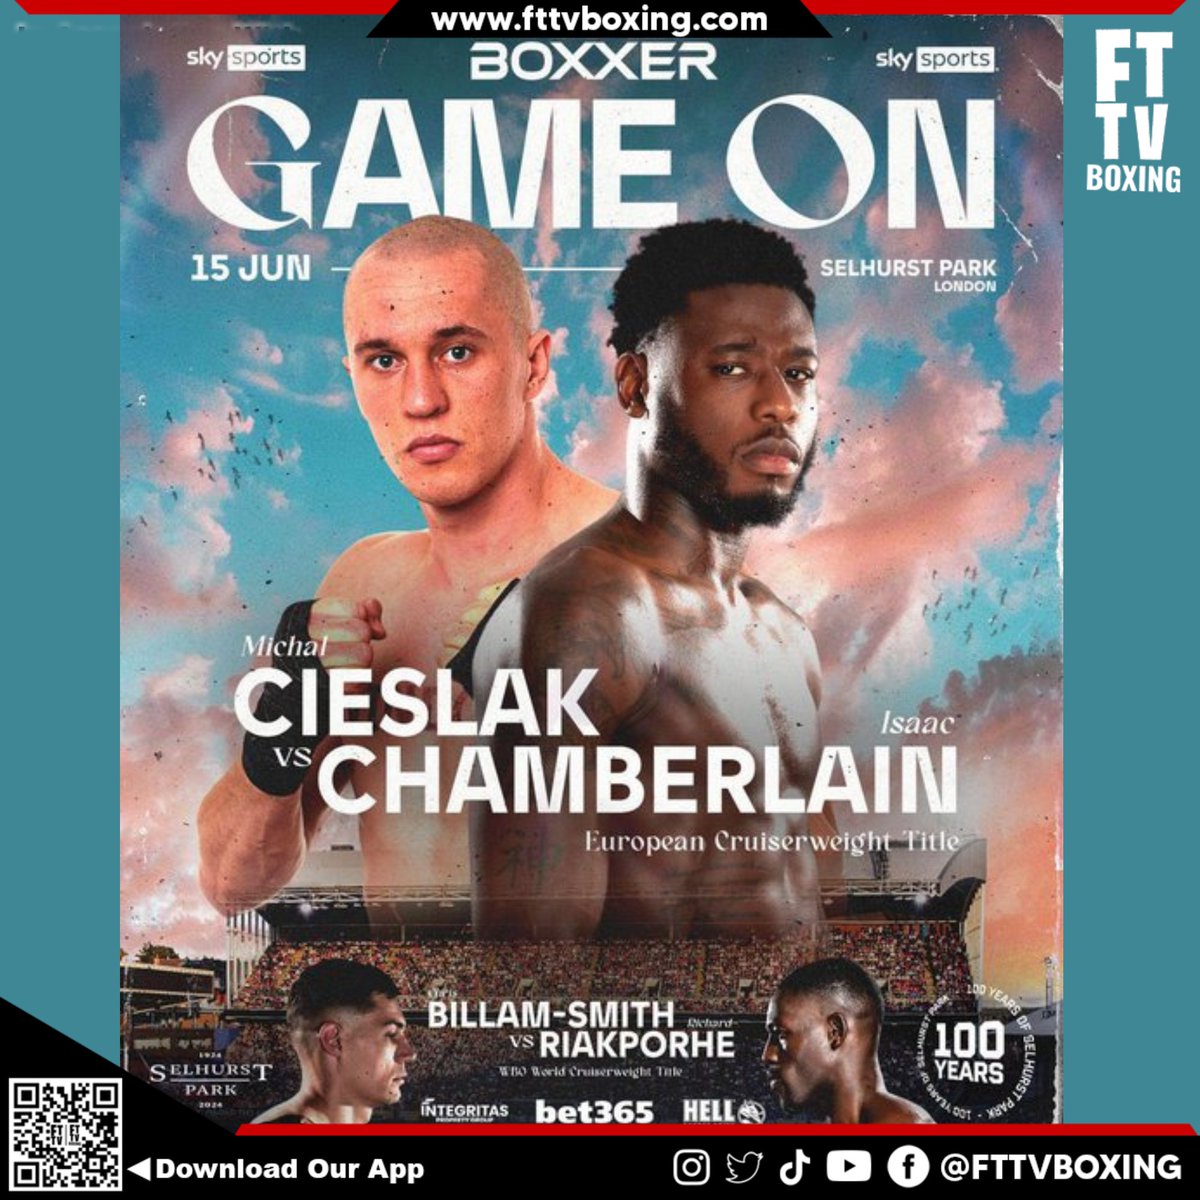 🥊 FIGHT ANNOUNCED! 🚨 @IChamberlain_ set to battle Michal Cieslak for the European Cruiserweight Title on the undercard of Billam-Smith vs. Riakporhe on June 15 at Selhurst Park! Don't miss the action! 🔥 #BillamSmithRiakporhe #CieslakChamberlain @SkySportsBoxing @peacock…